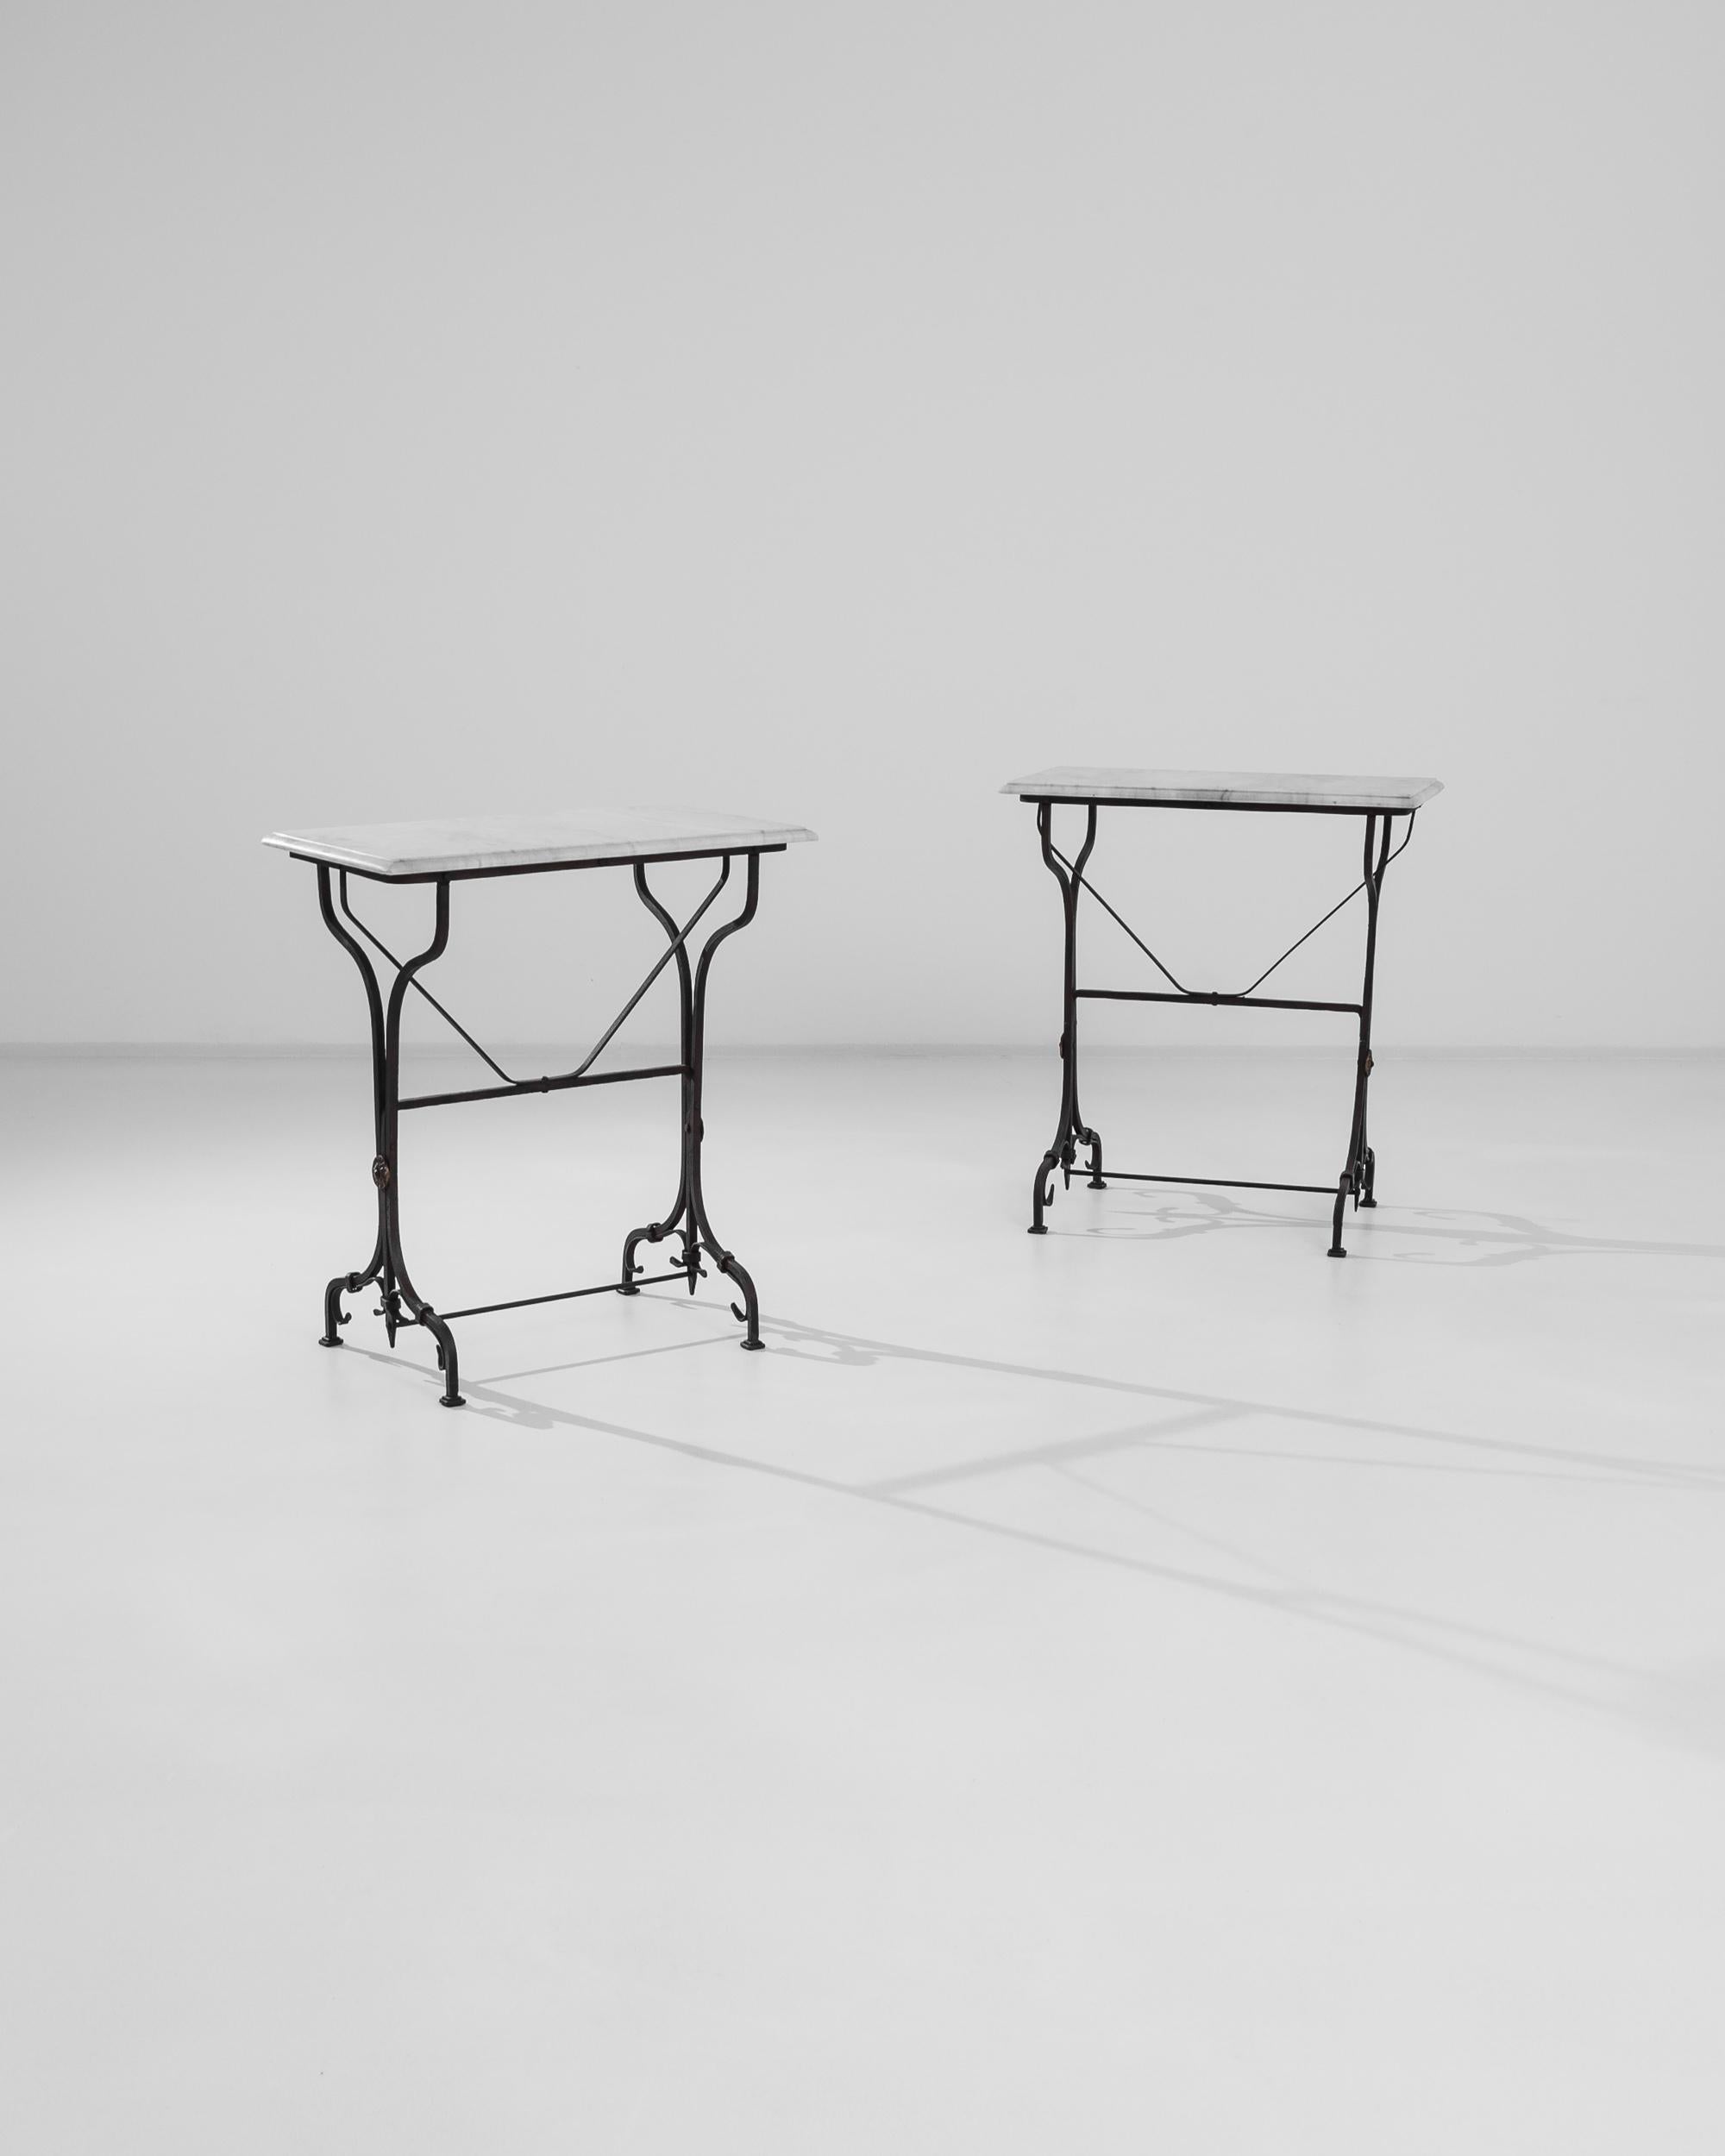 This pair of wrought iron tables from 1950s France provide a unique and eye-catching accent. The dark metal of the frame creates a striking silhouette; railheads and curving decorative bars add a sinuous gothic touch. A tabletop of white marble,